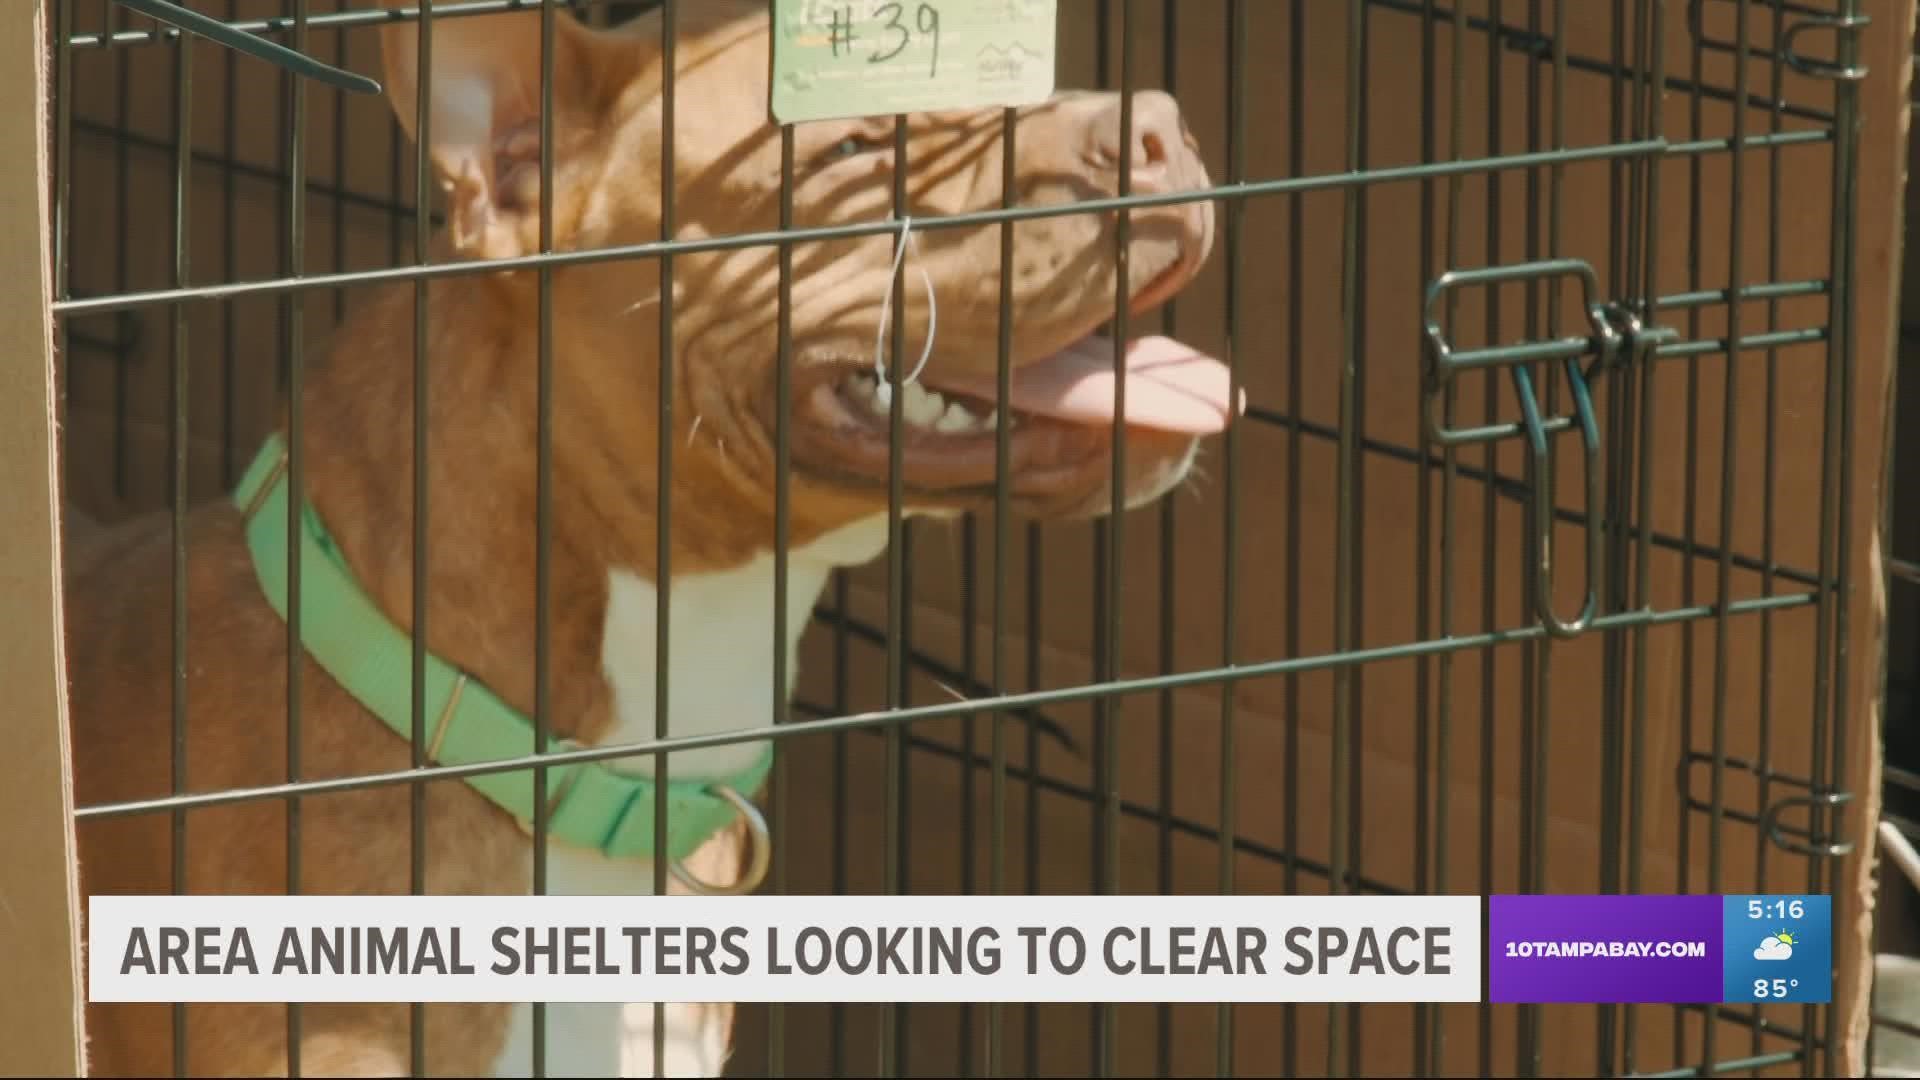 In the wake of Hurricane Ian, Pasco County Animal Services is partnering with other Tampa Bay animal shelters in a mega adoption event.